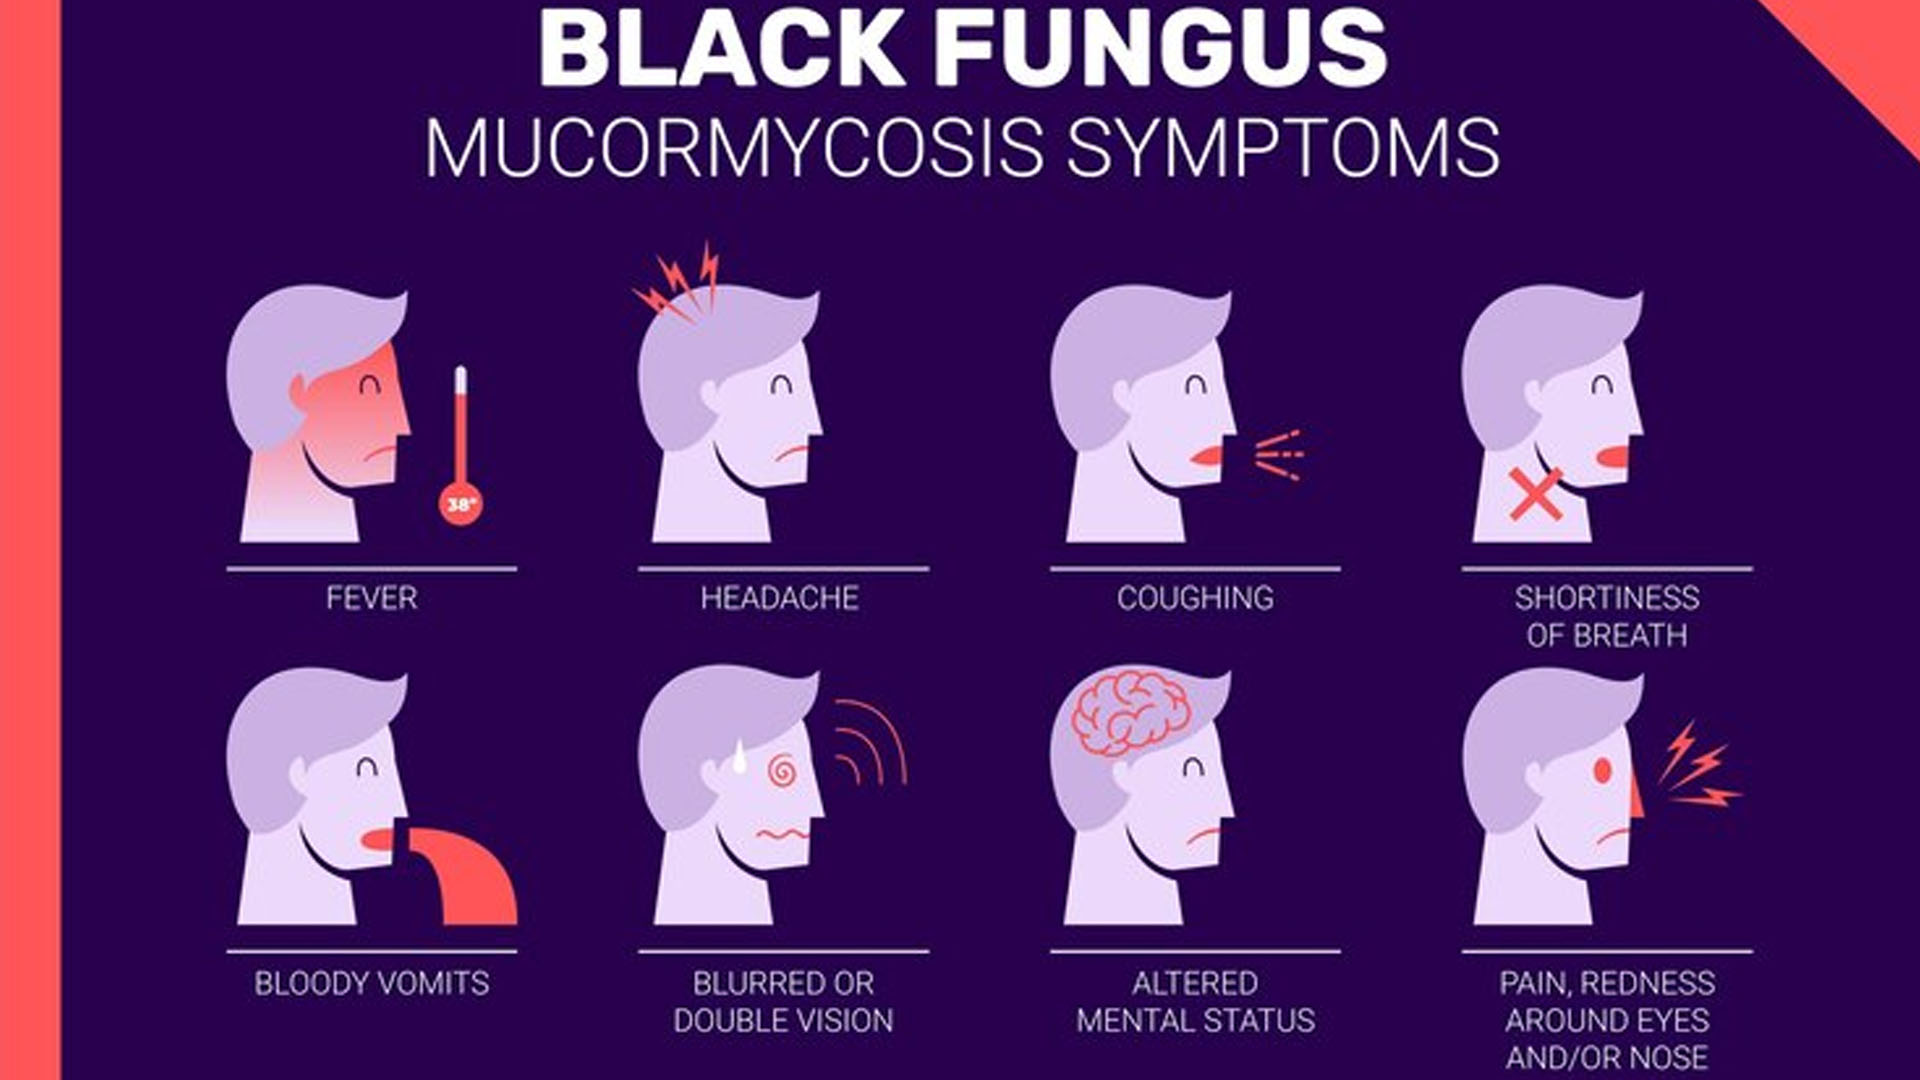 What are the Symptoms of Mucormycosis?